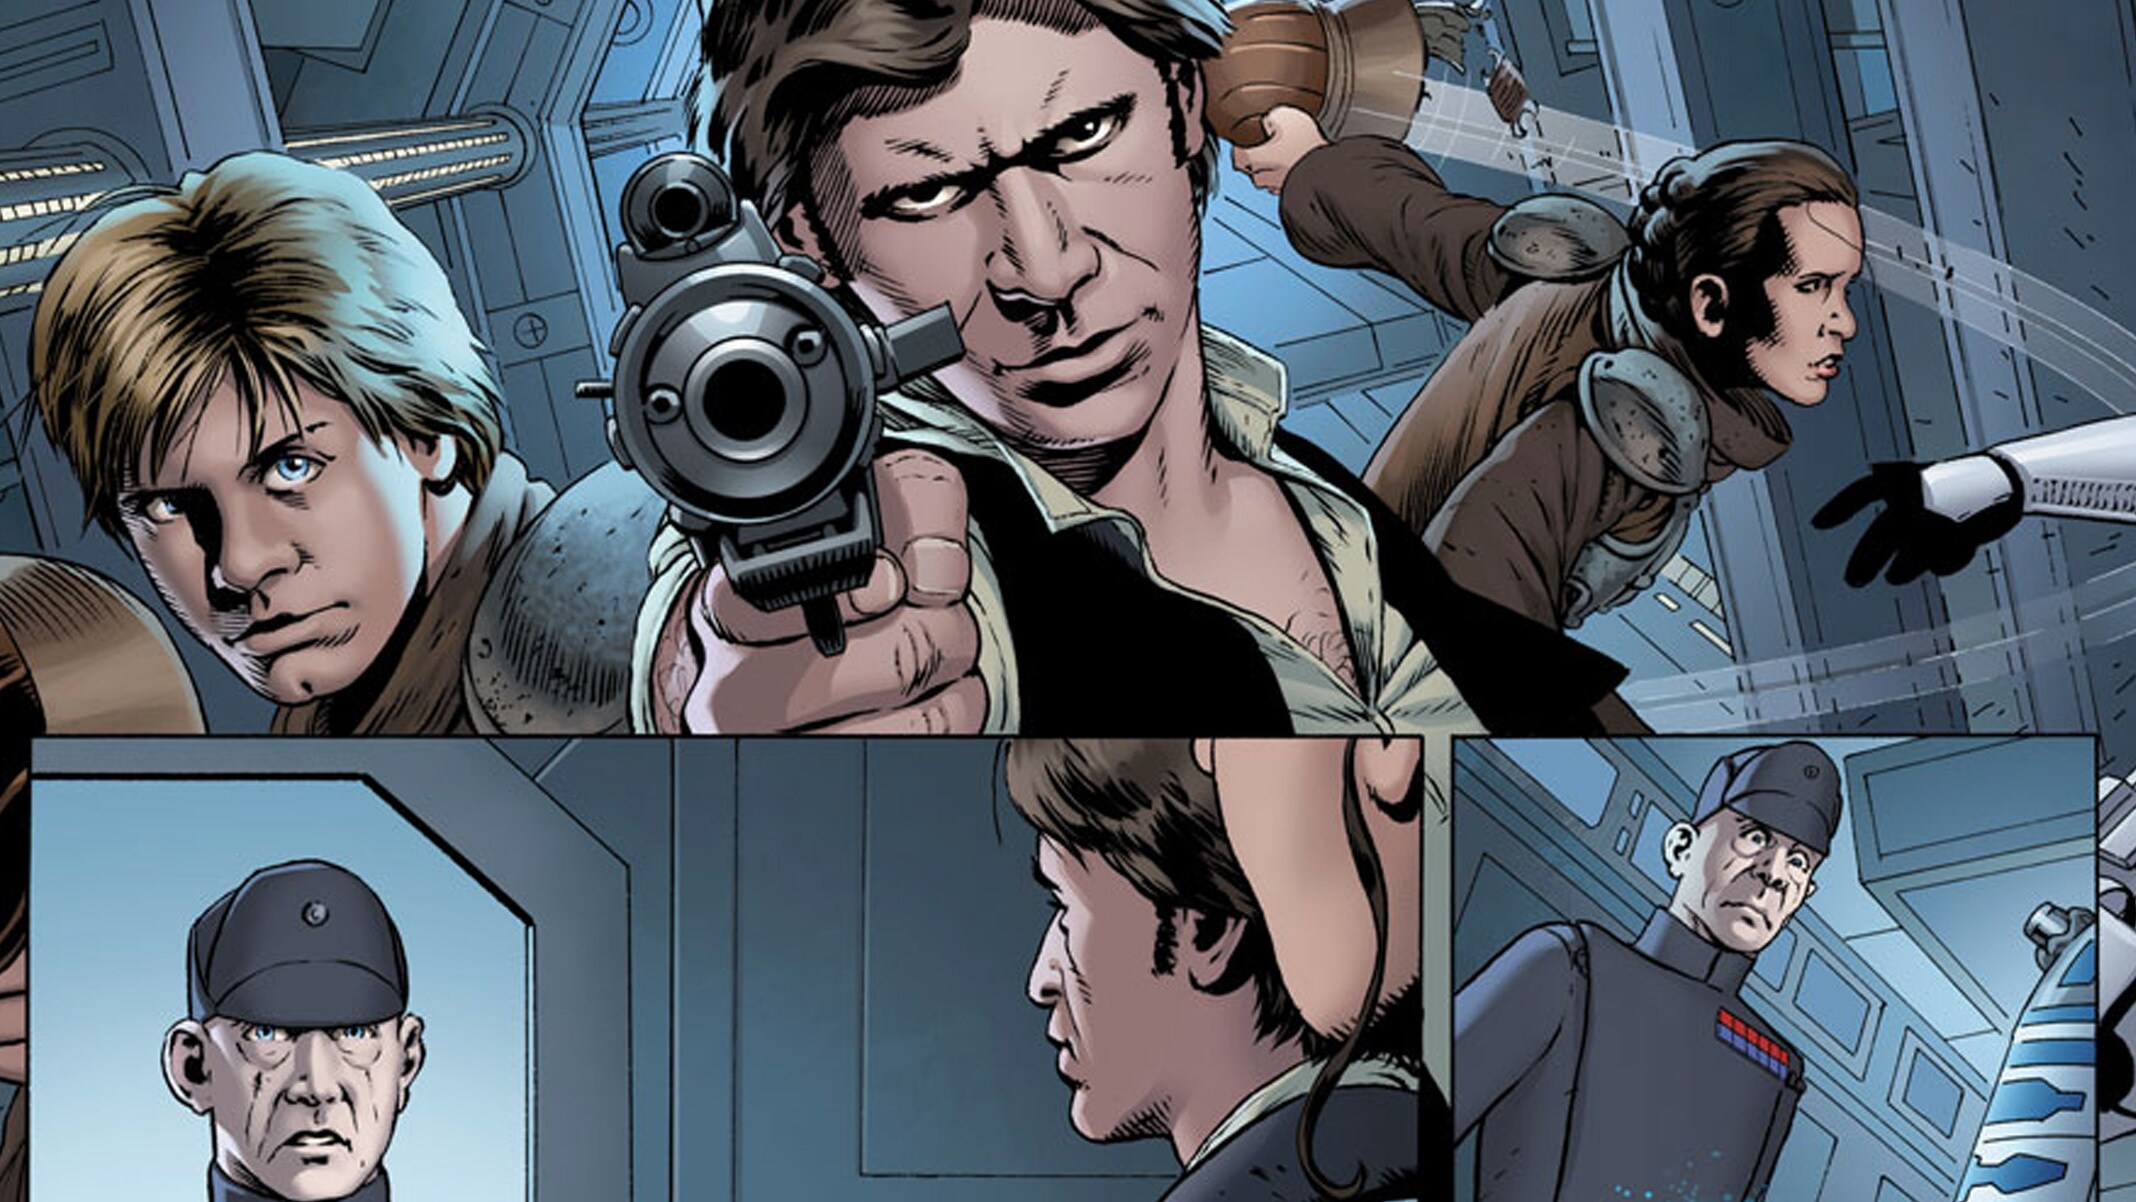 Marvel's Star Wars #1 - Exclusive Preview!